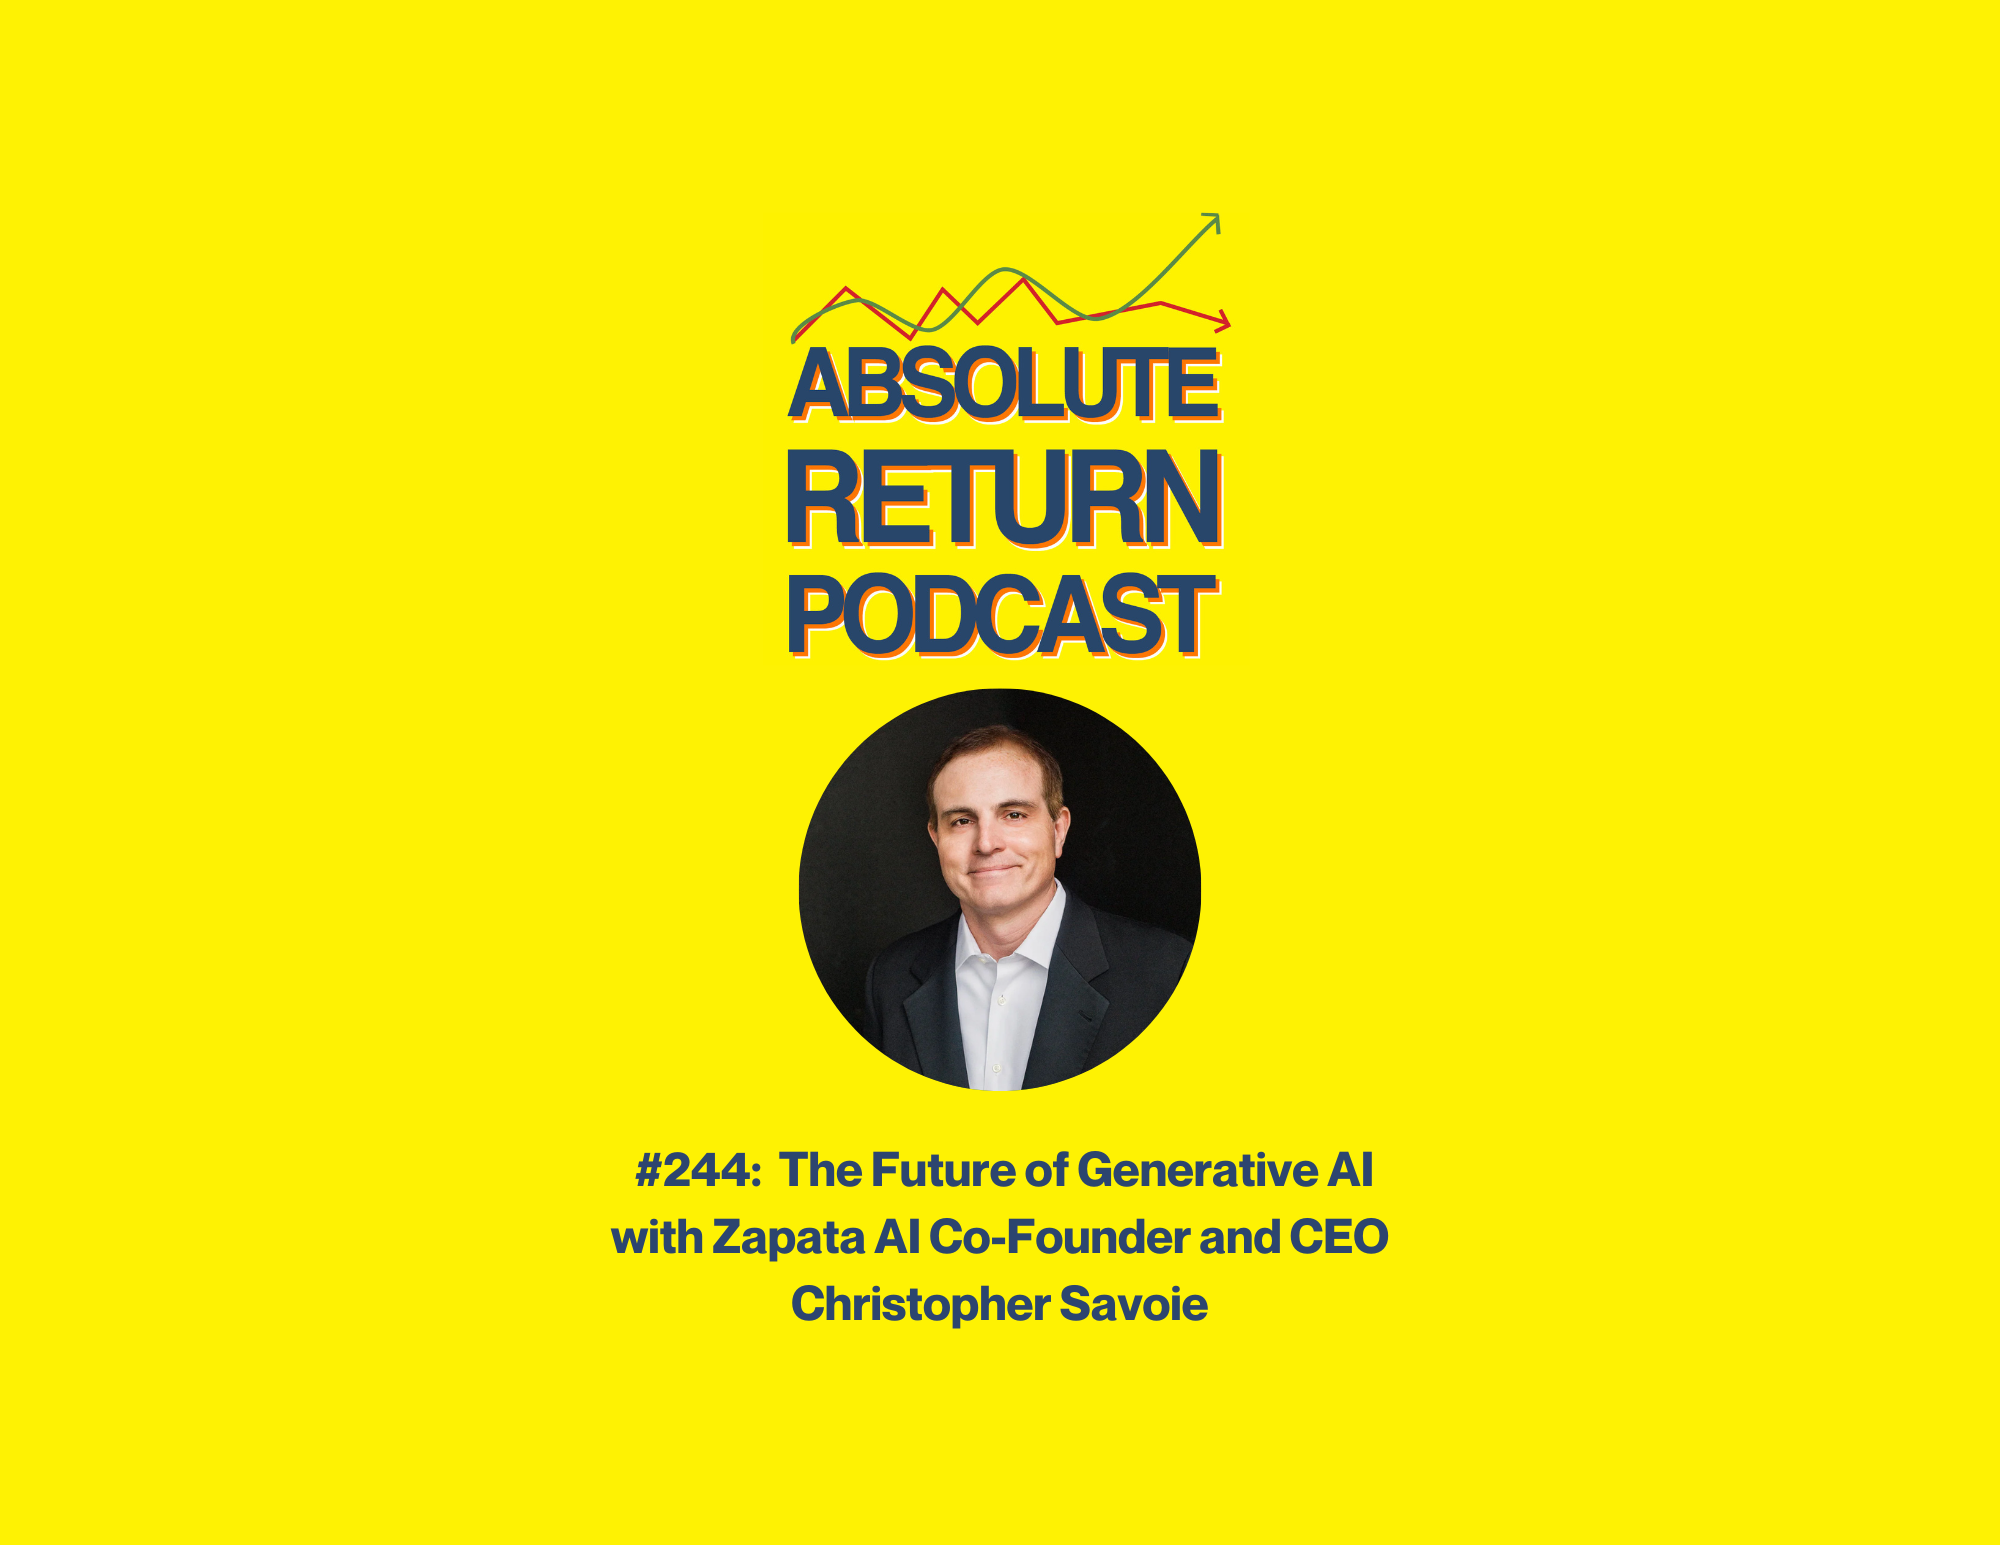 Absolute Return Podcast #244: The Future of Generative AI with Zapata AI Co-Founder and CEO Christopher Savoie